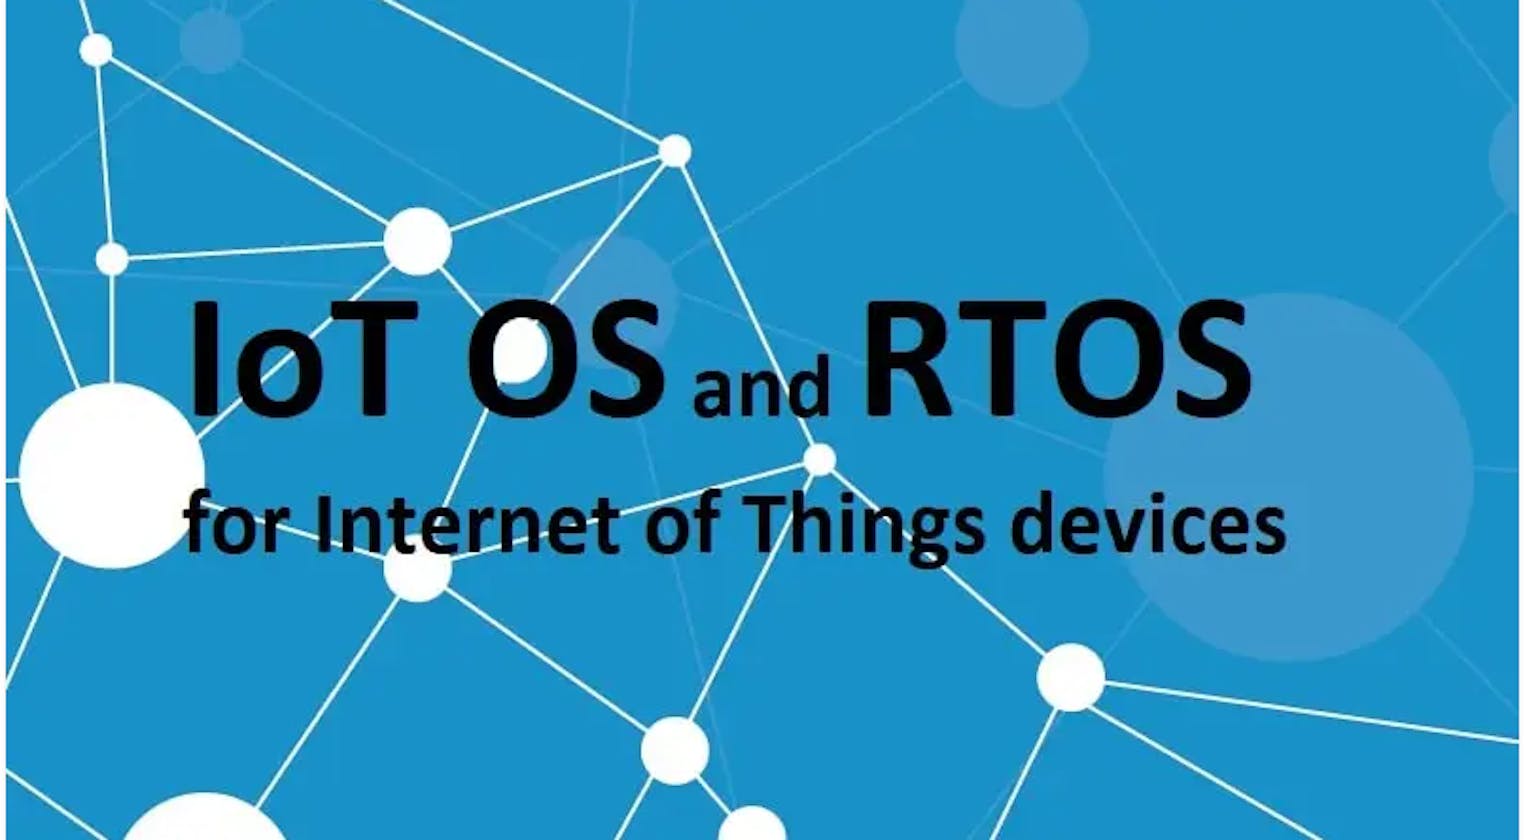 Embedded Systems 101: RTOS and IoT OS Demystified